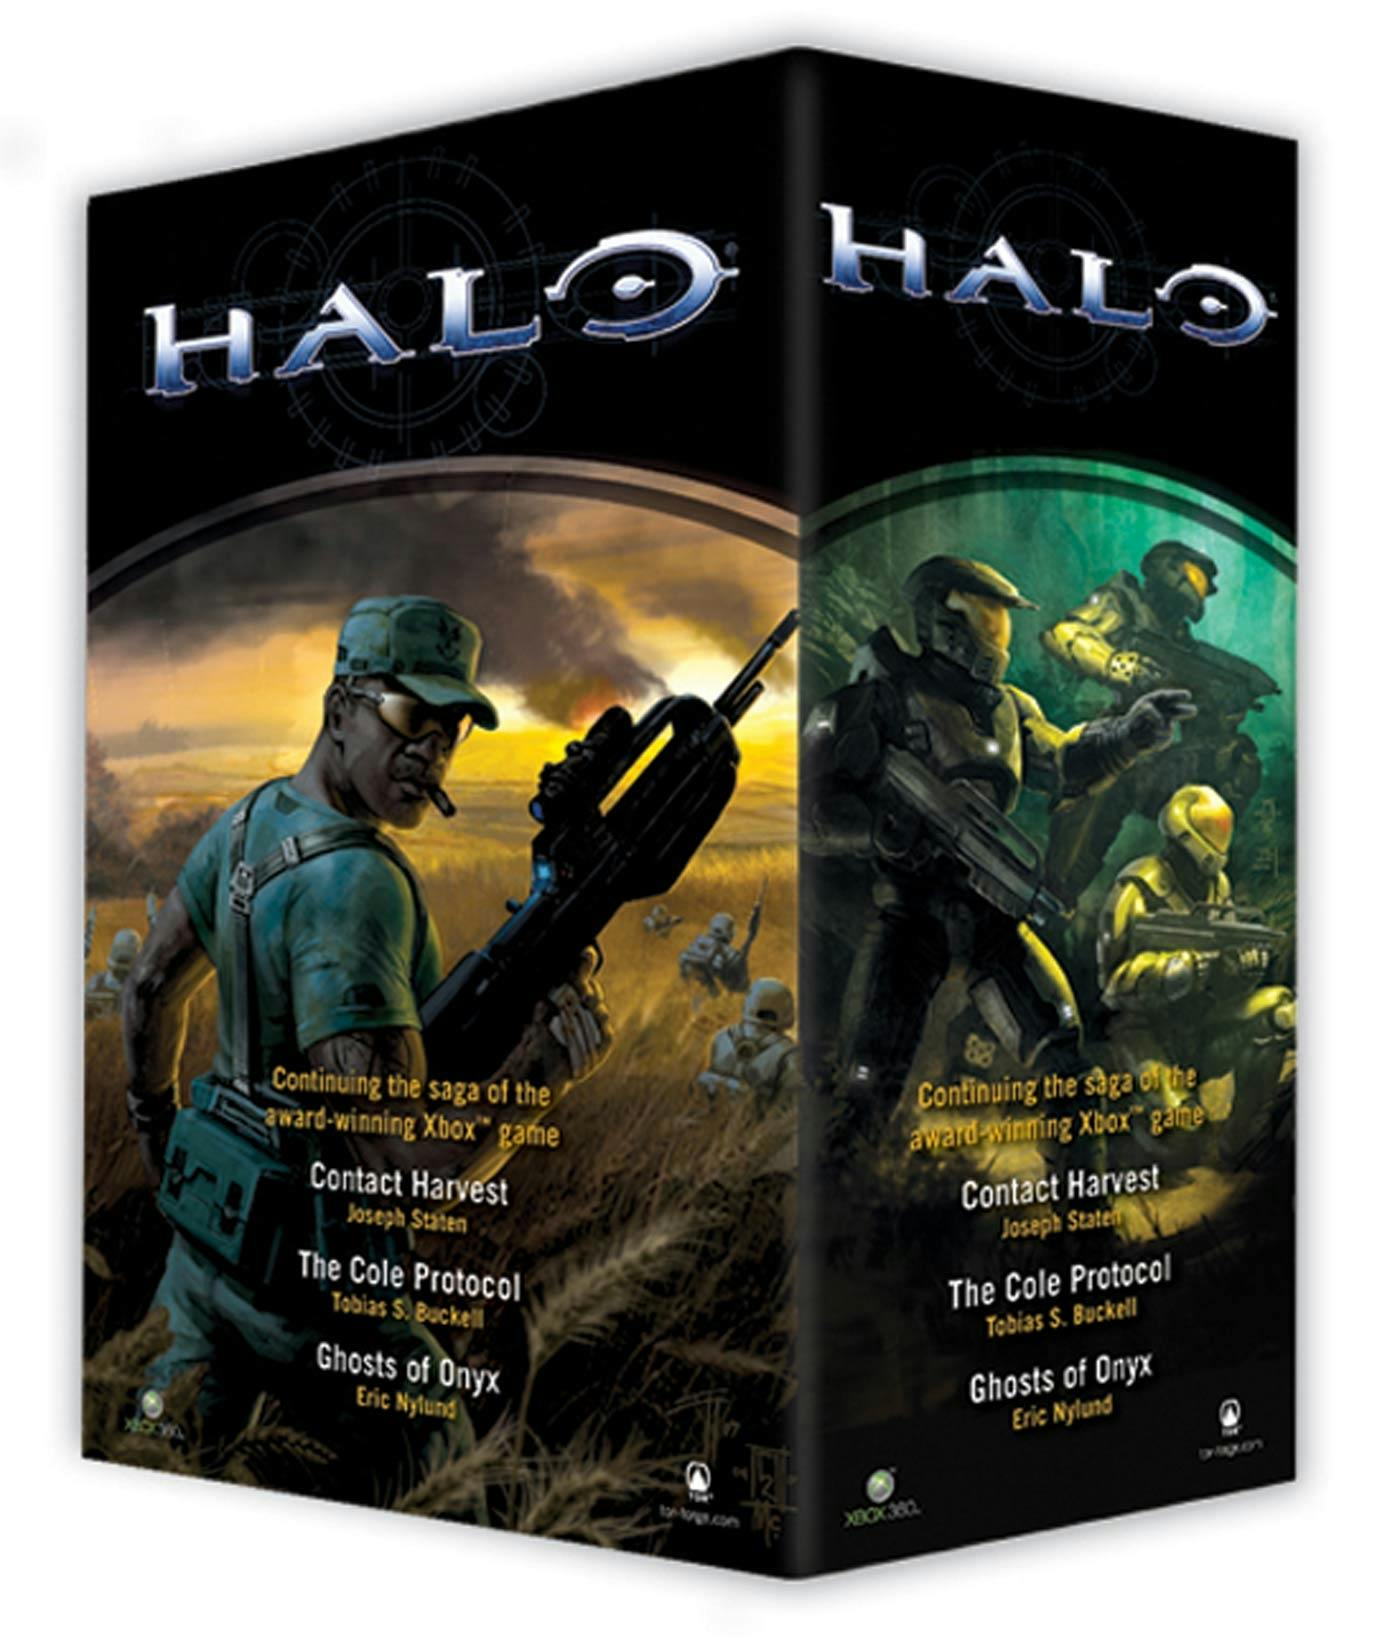 Cover for the book titled as: Halo Boxed Set